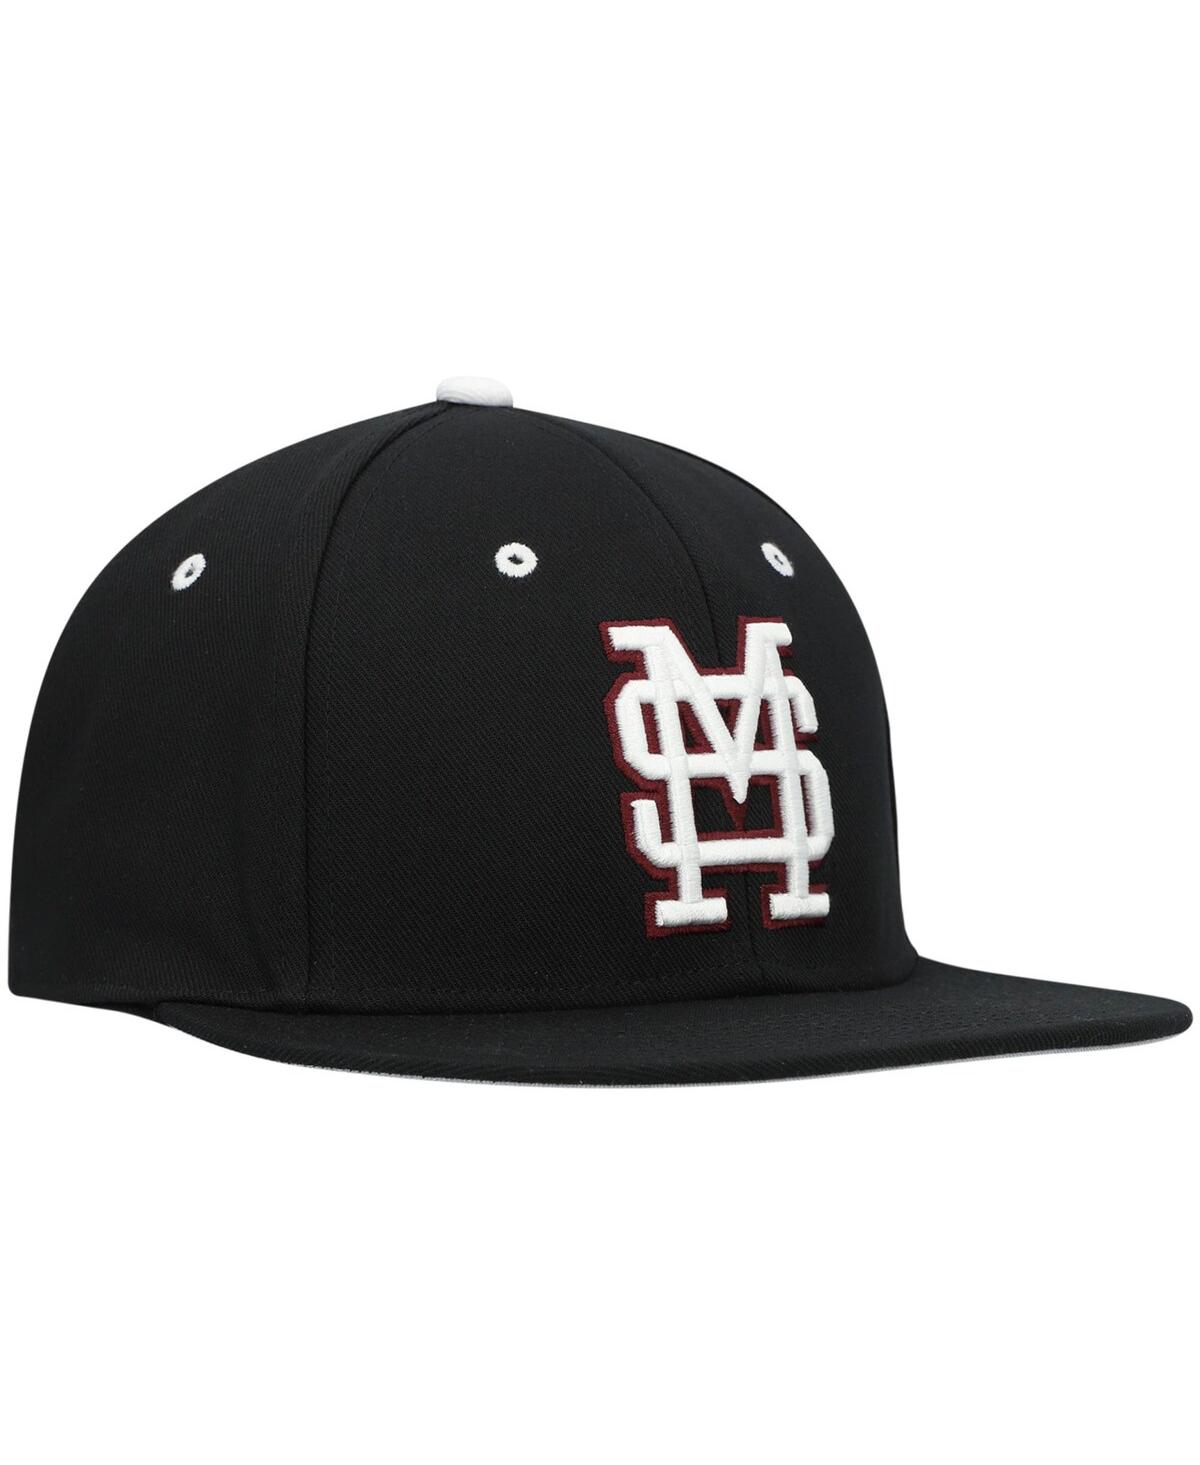 Shop Adidas Originals Men's Adidas Black Mississippi State Bulldogs On-field Baseball Fitted Hat